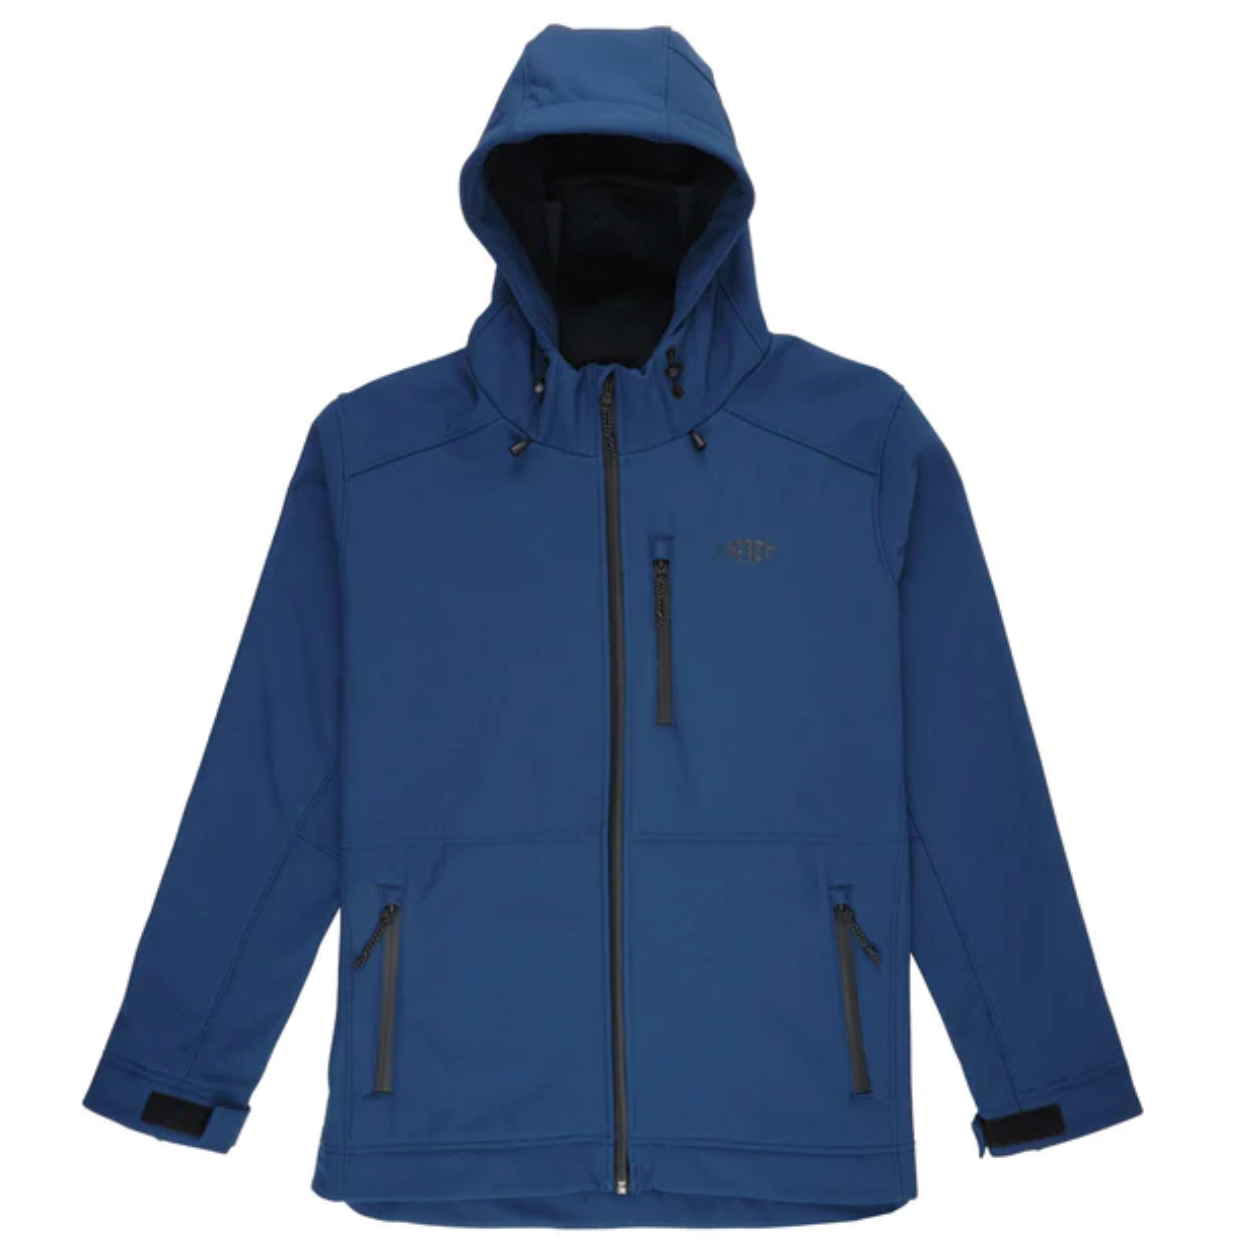 AFTCO Reaper Softshell Zip Up Jacket